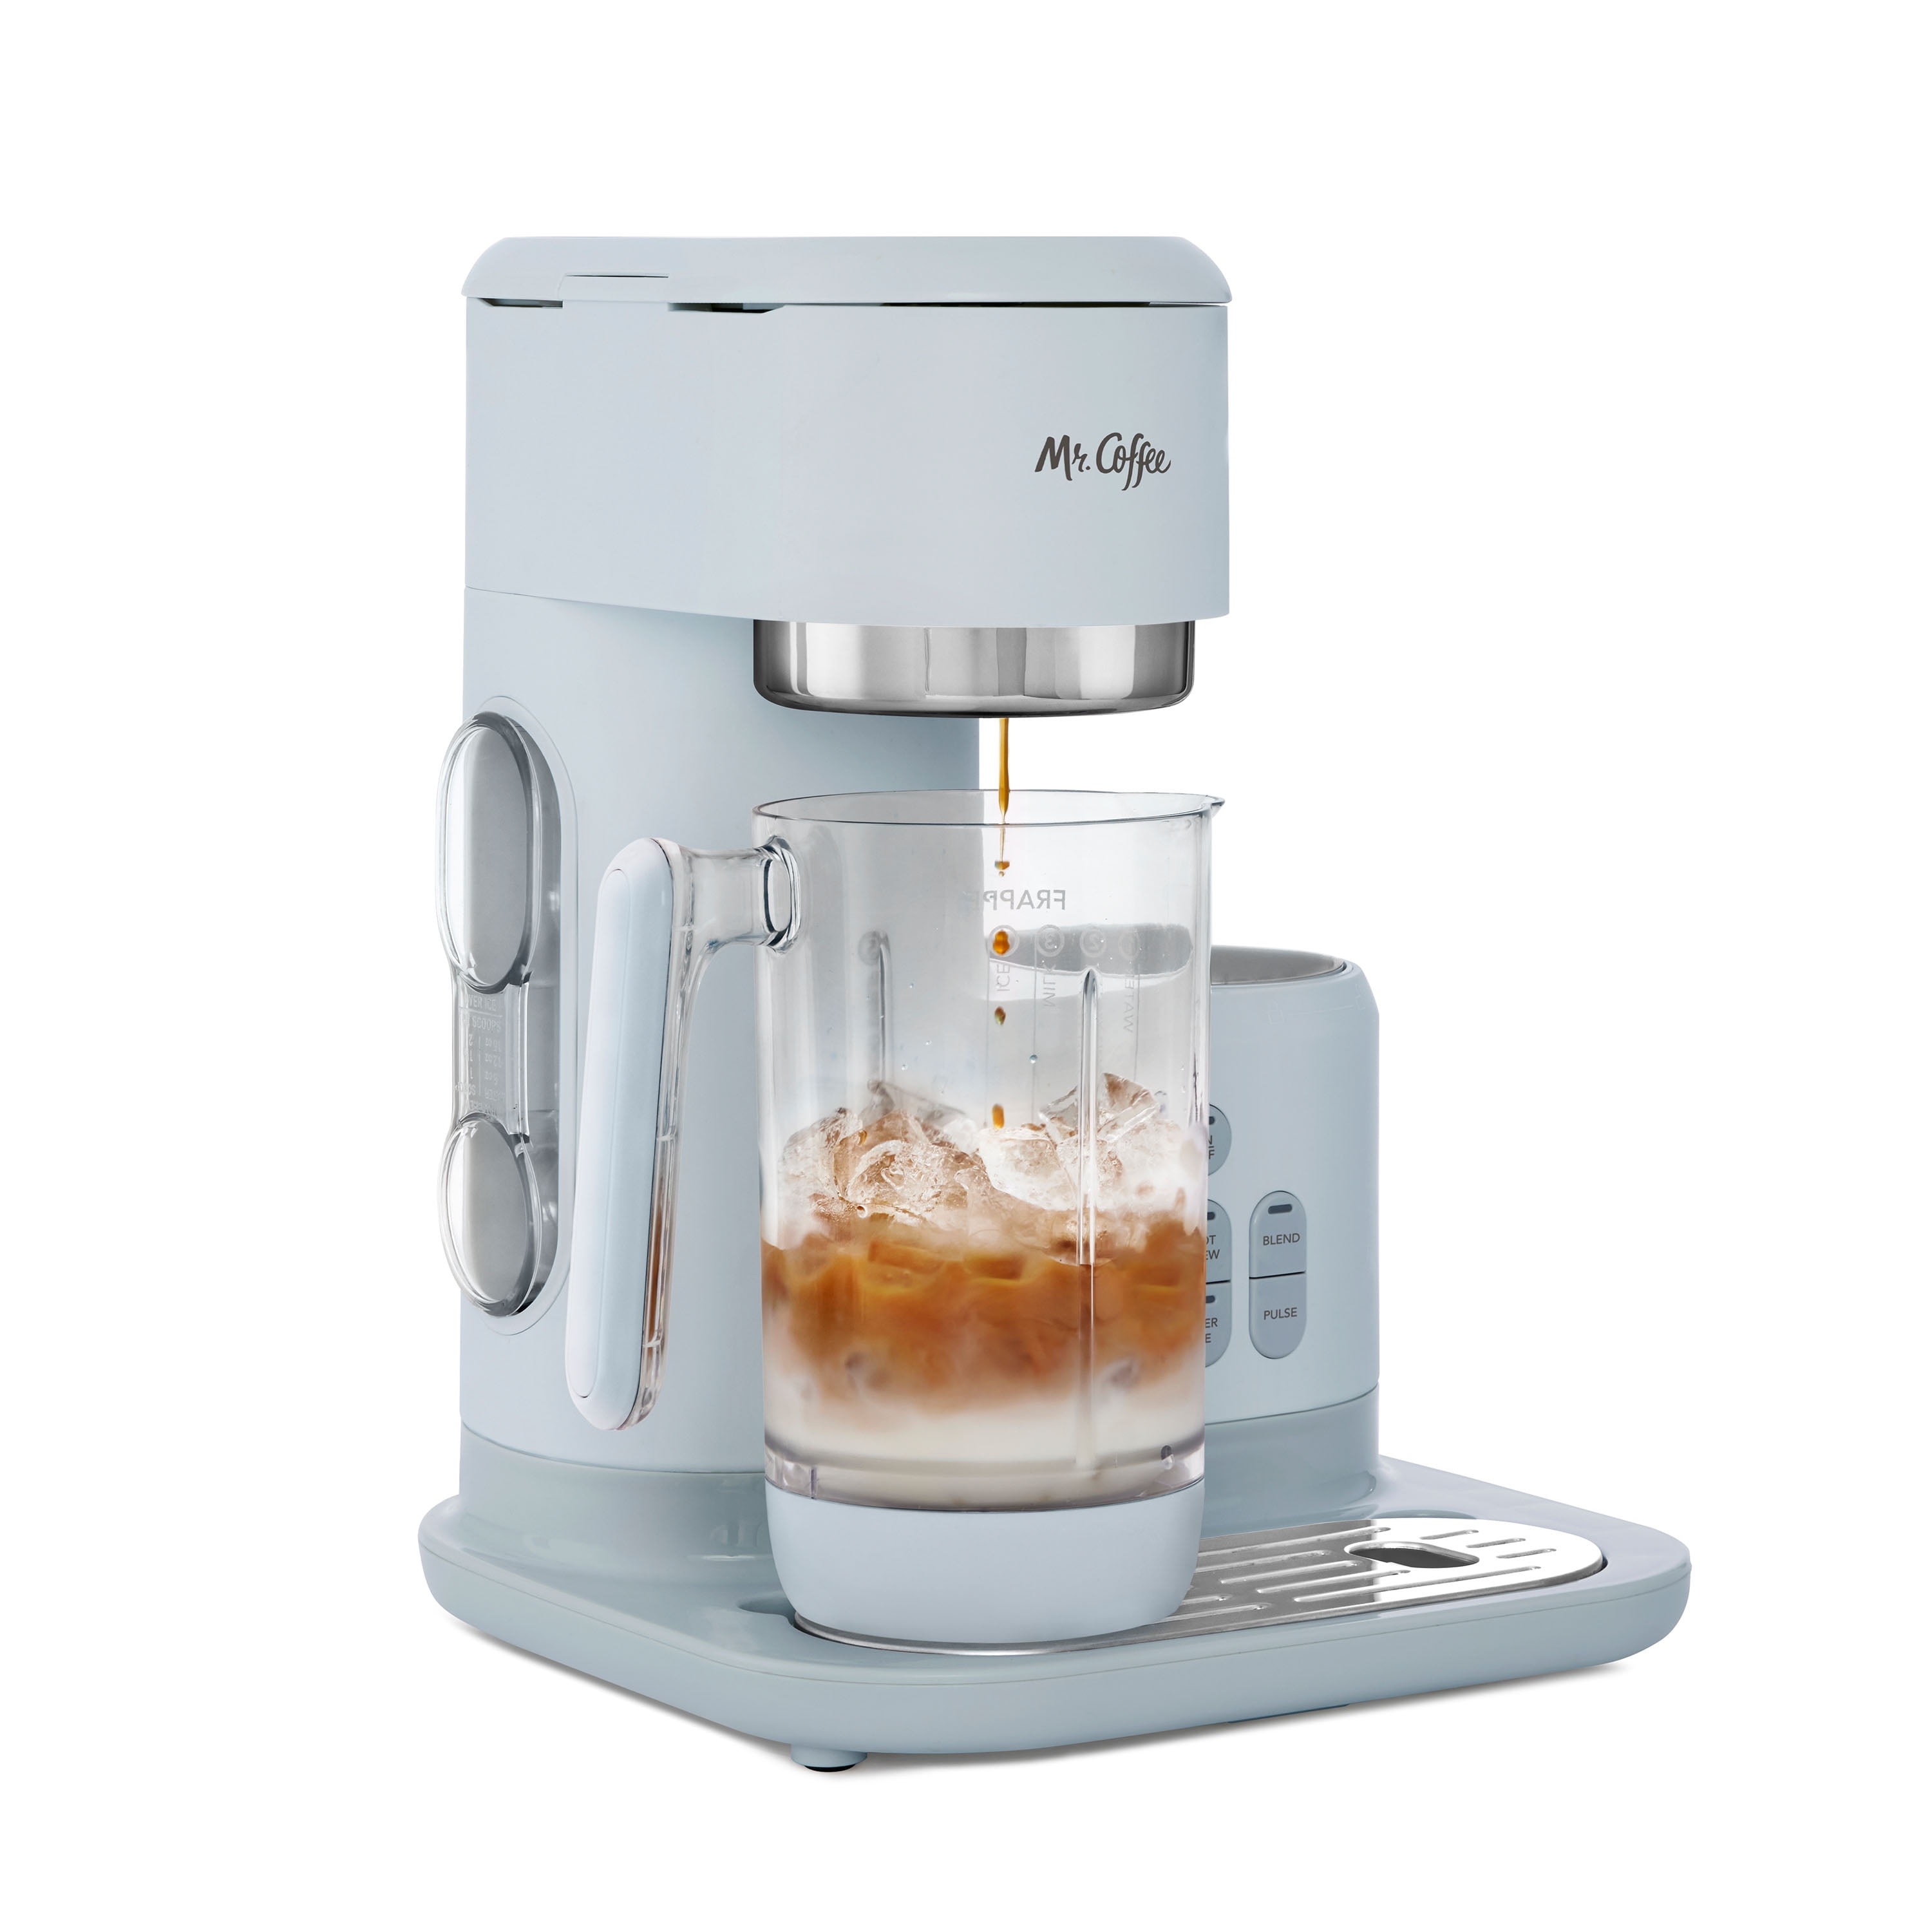 Mr. Coffee Frappe Hot and Cold Single-Serve Coffeemaker - Lavender